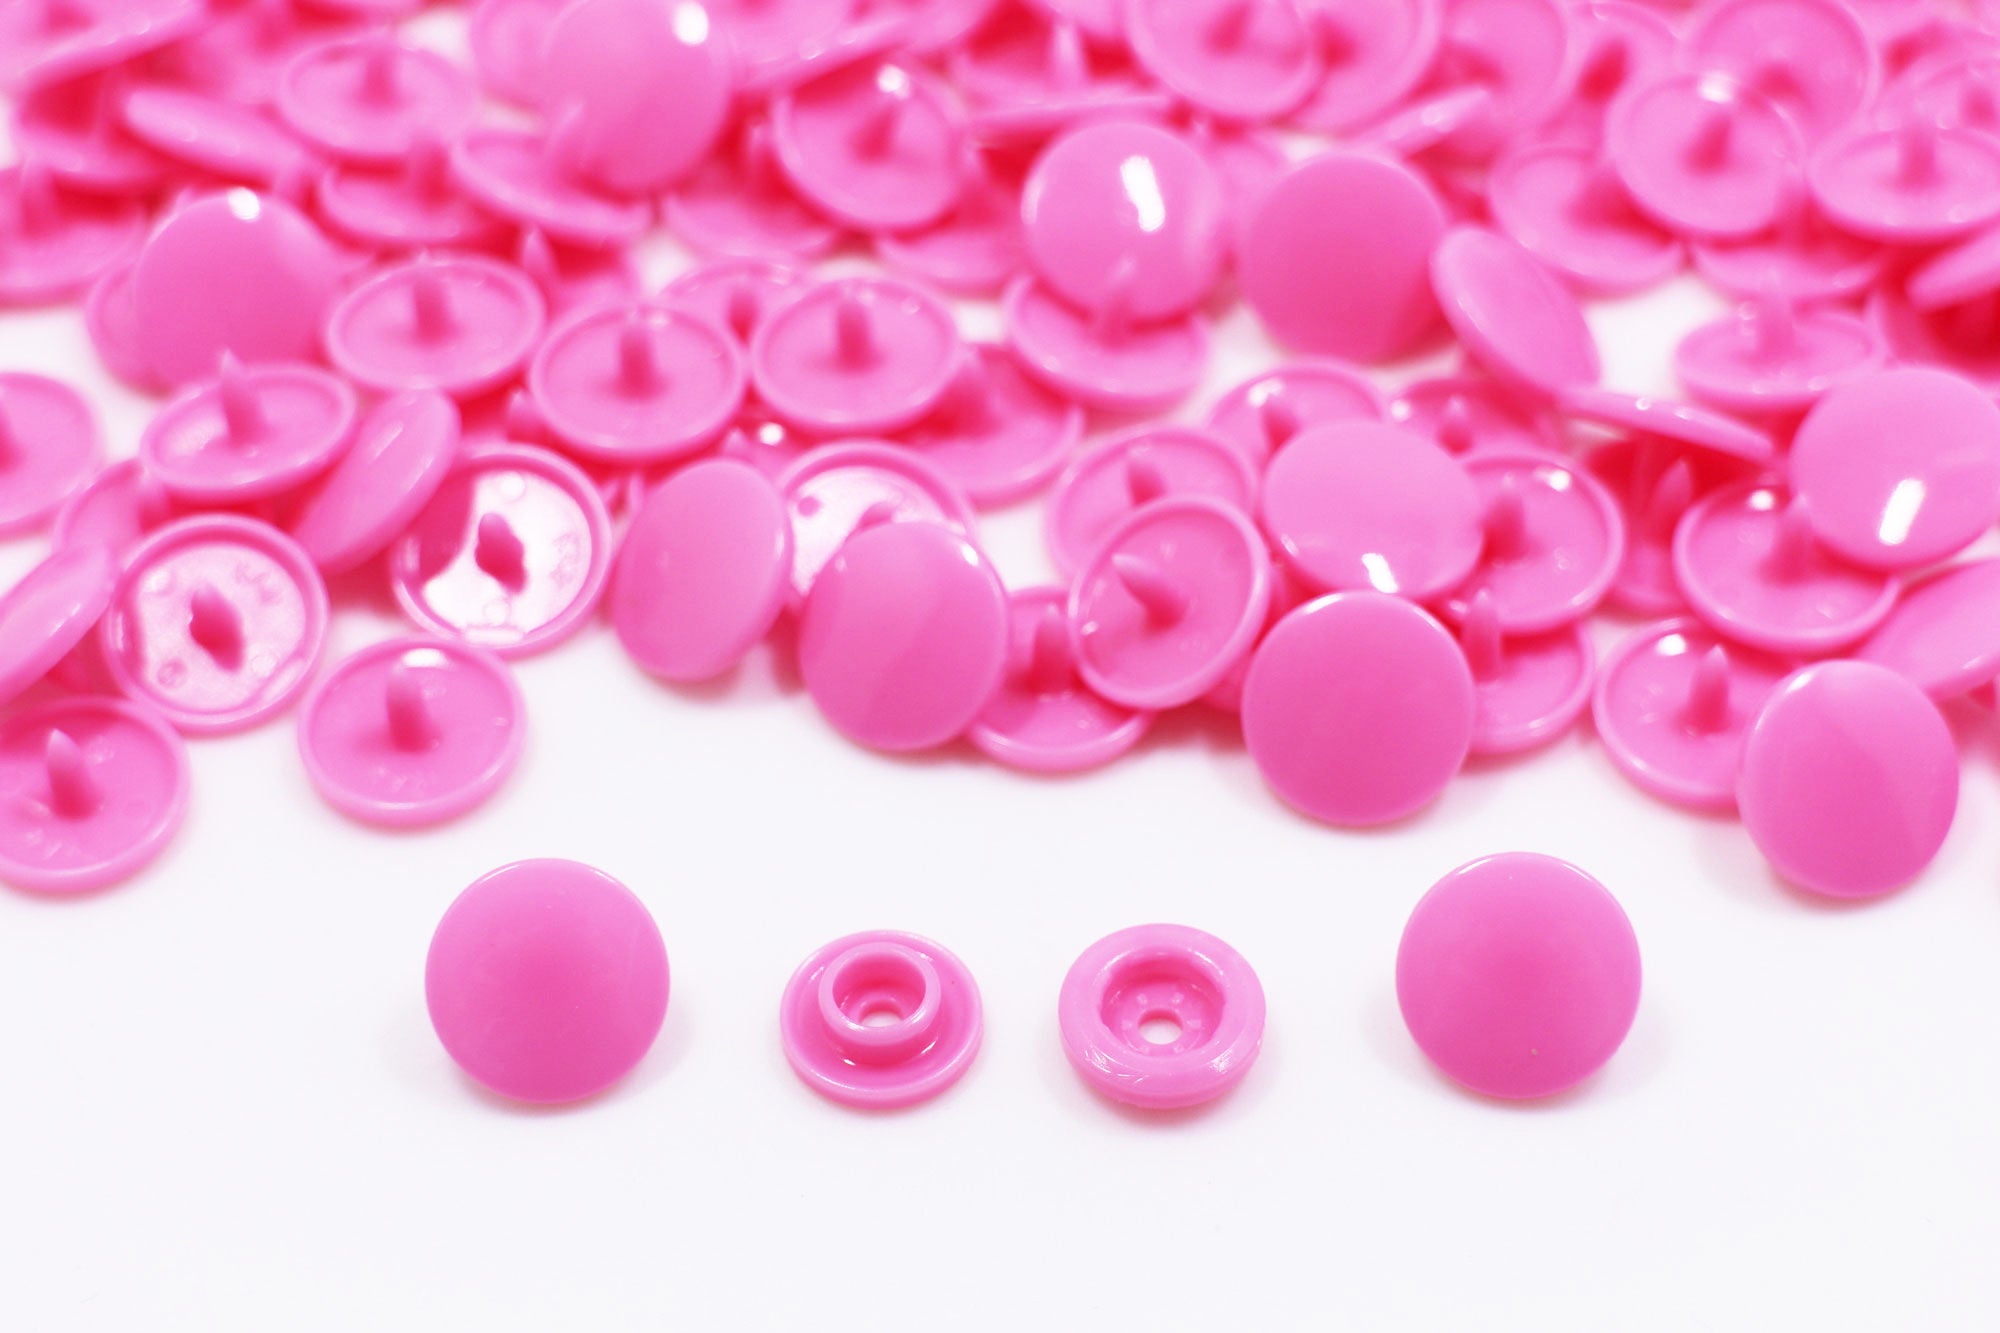 50Sets T5 pink PLASTIC RESIN SNAPS BUTTON FASTENERS PRESS STUD POPPERS 